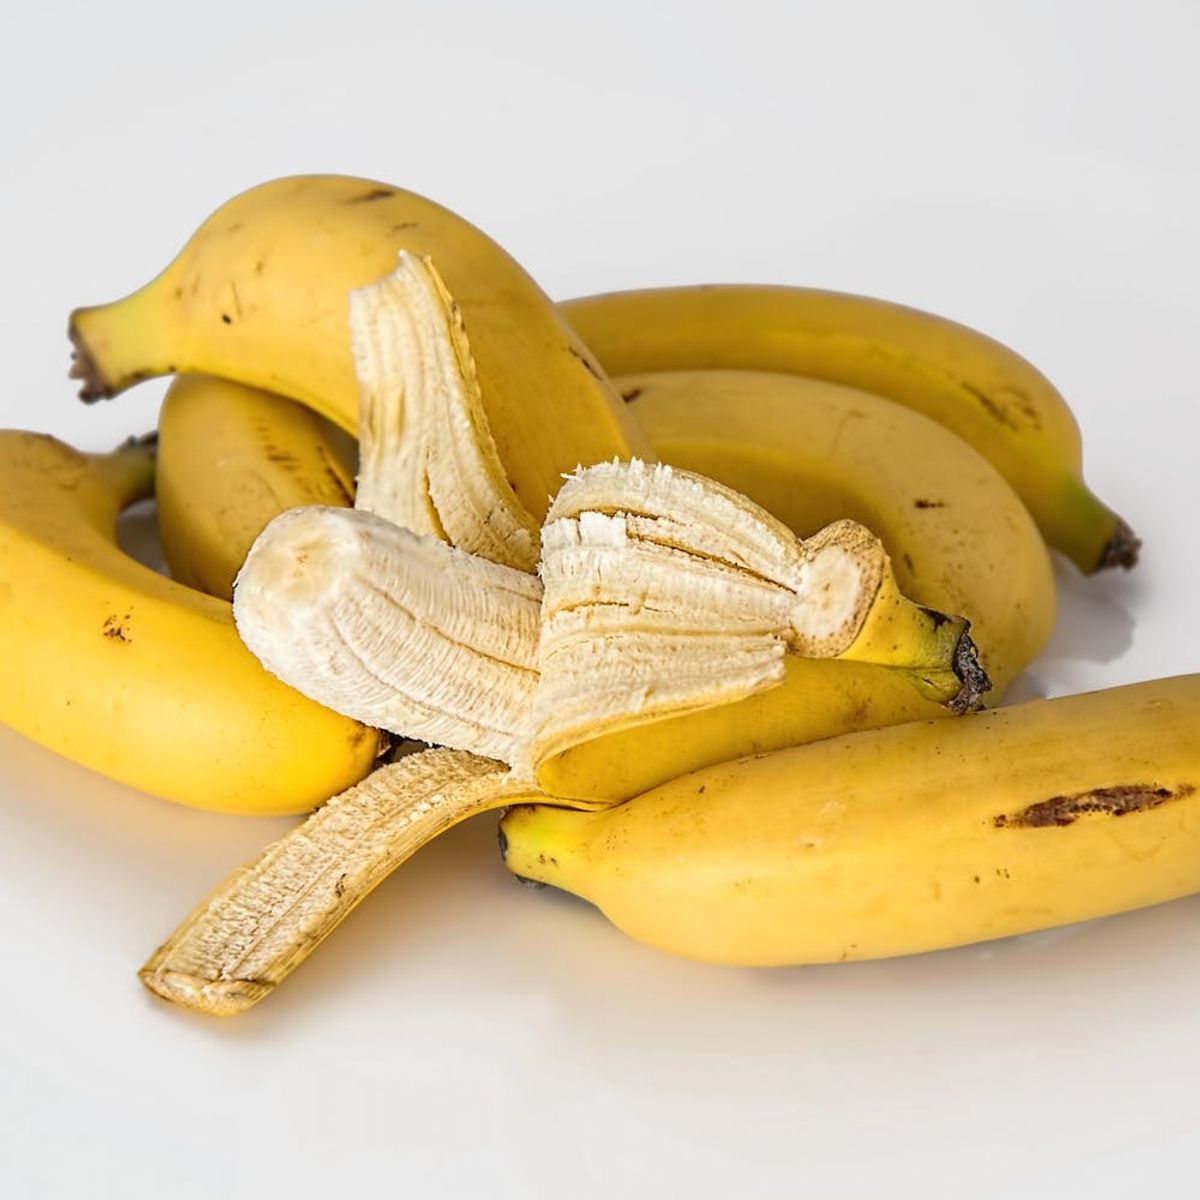 Making the Case for Leaving the Strings on Your Banana